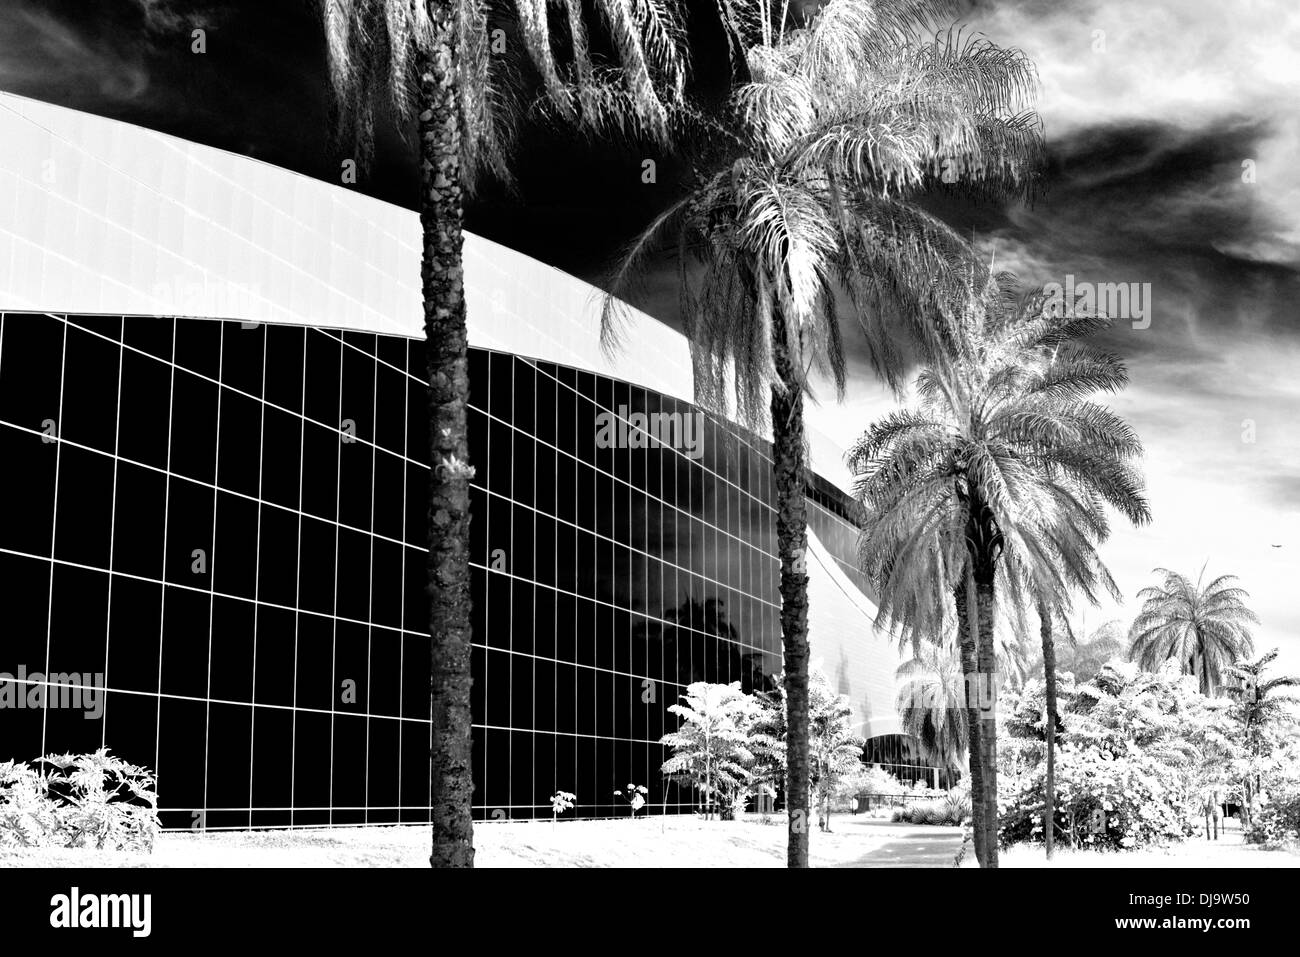 Brazil, Brasilia: Palm trees and Glass facade of the Convention Center Ulysses Guimaraes Stock Photo